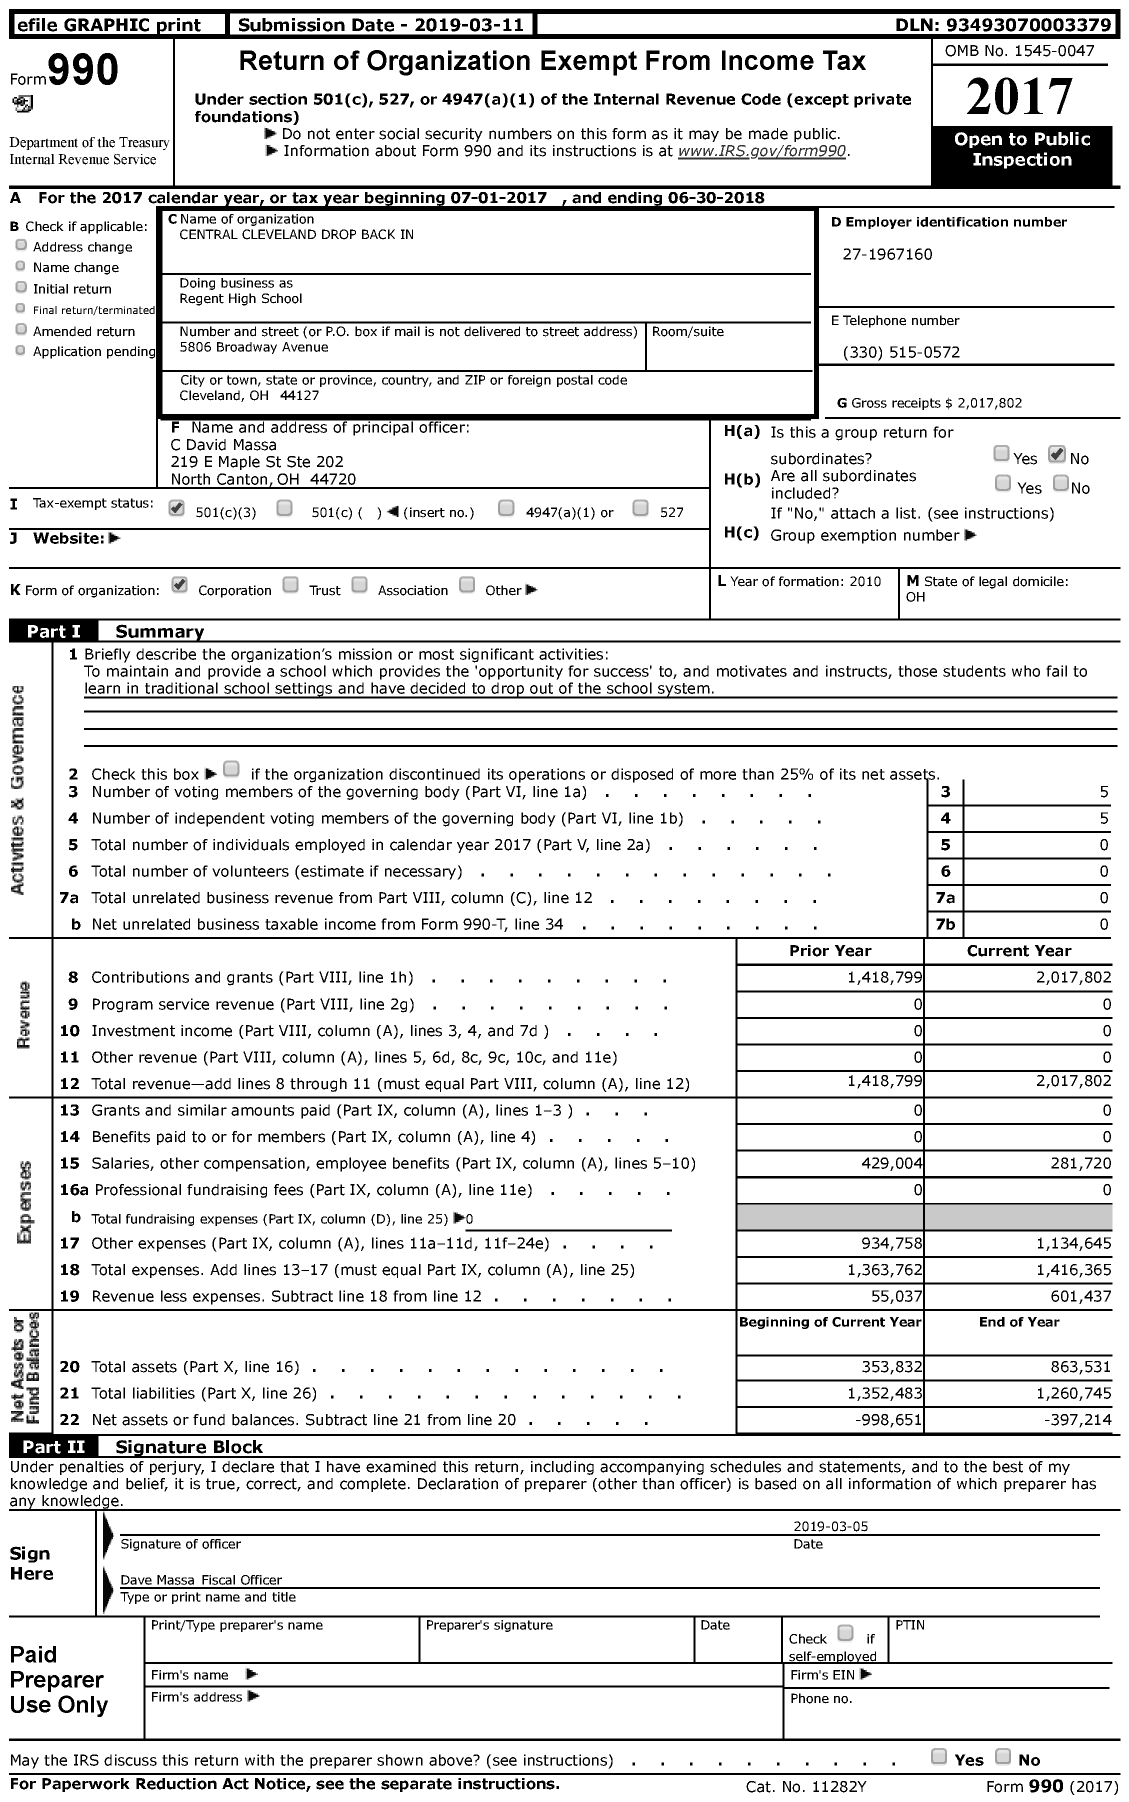 Image of first page of 2017 Form 990 for Regent High School